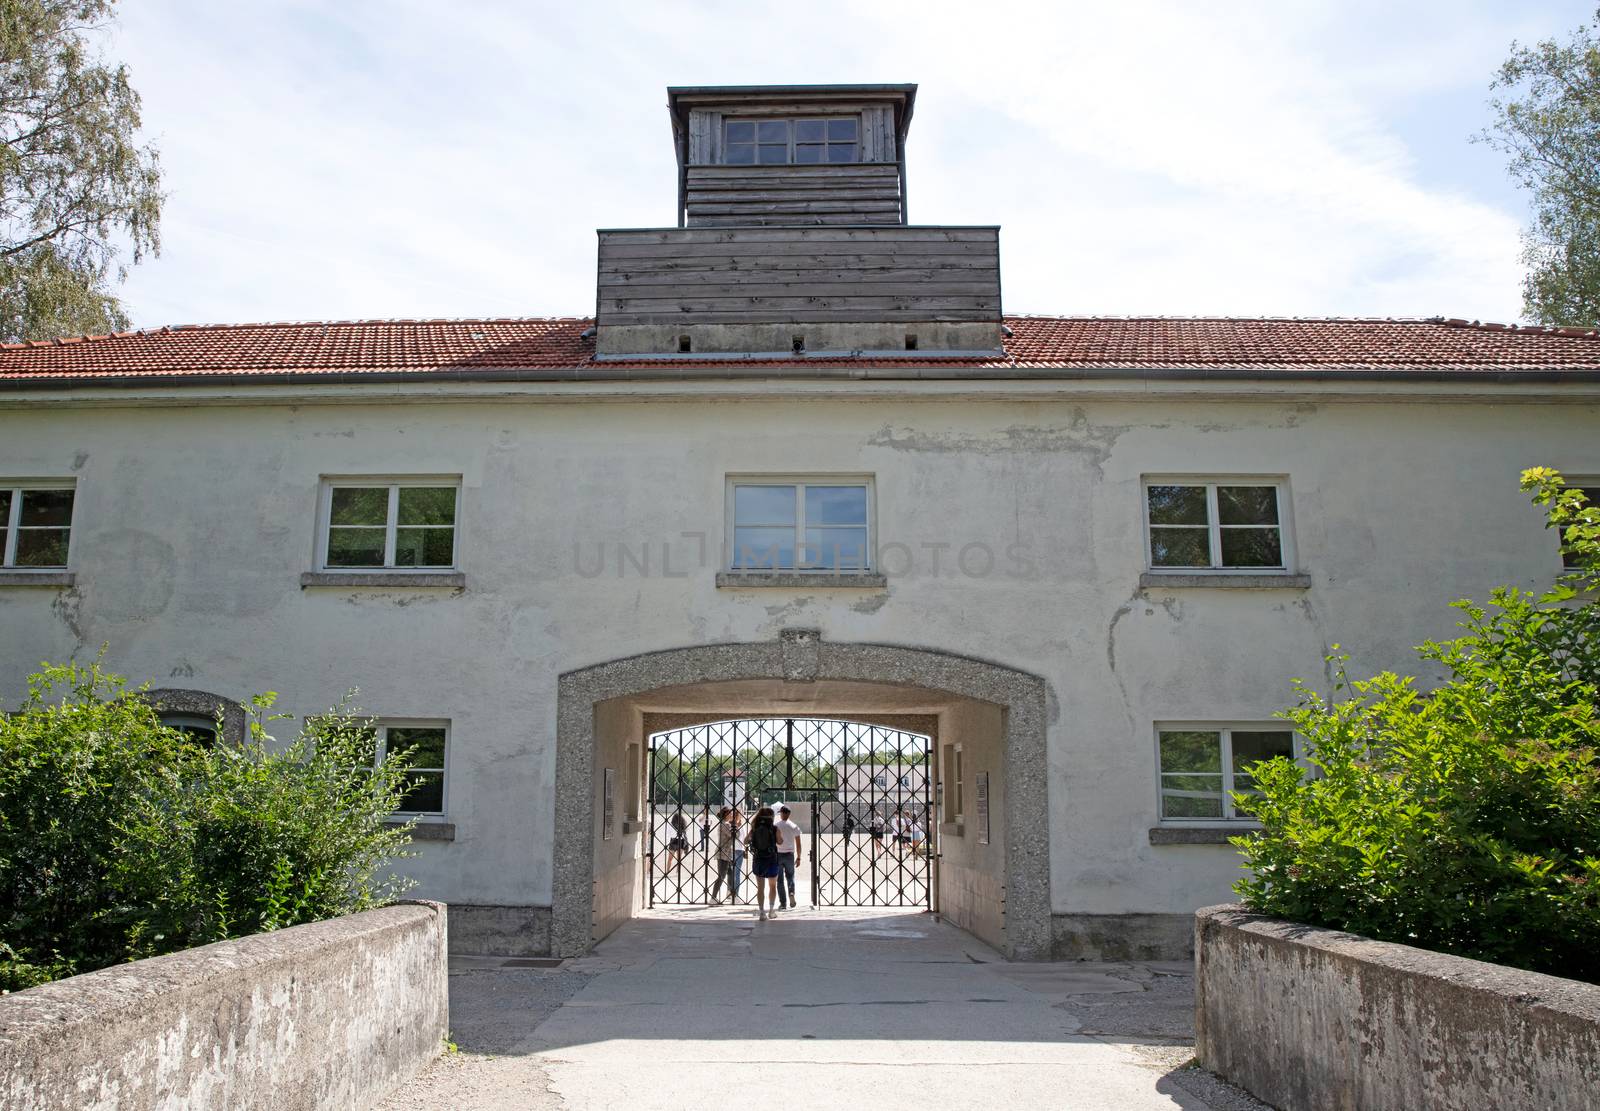 Dachau, Germany - July 13, 2020: Entrance in Dachau concentration camp, the first Nazi concentration camp opened in Germany